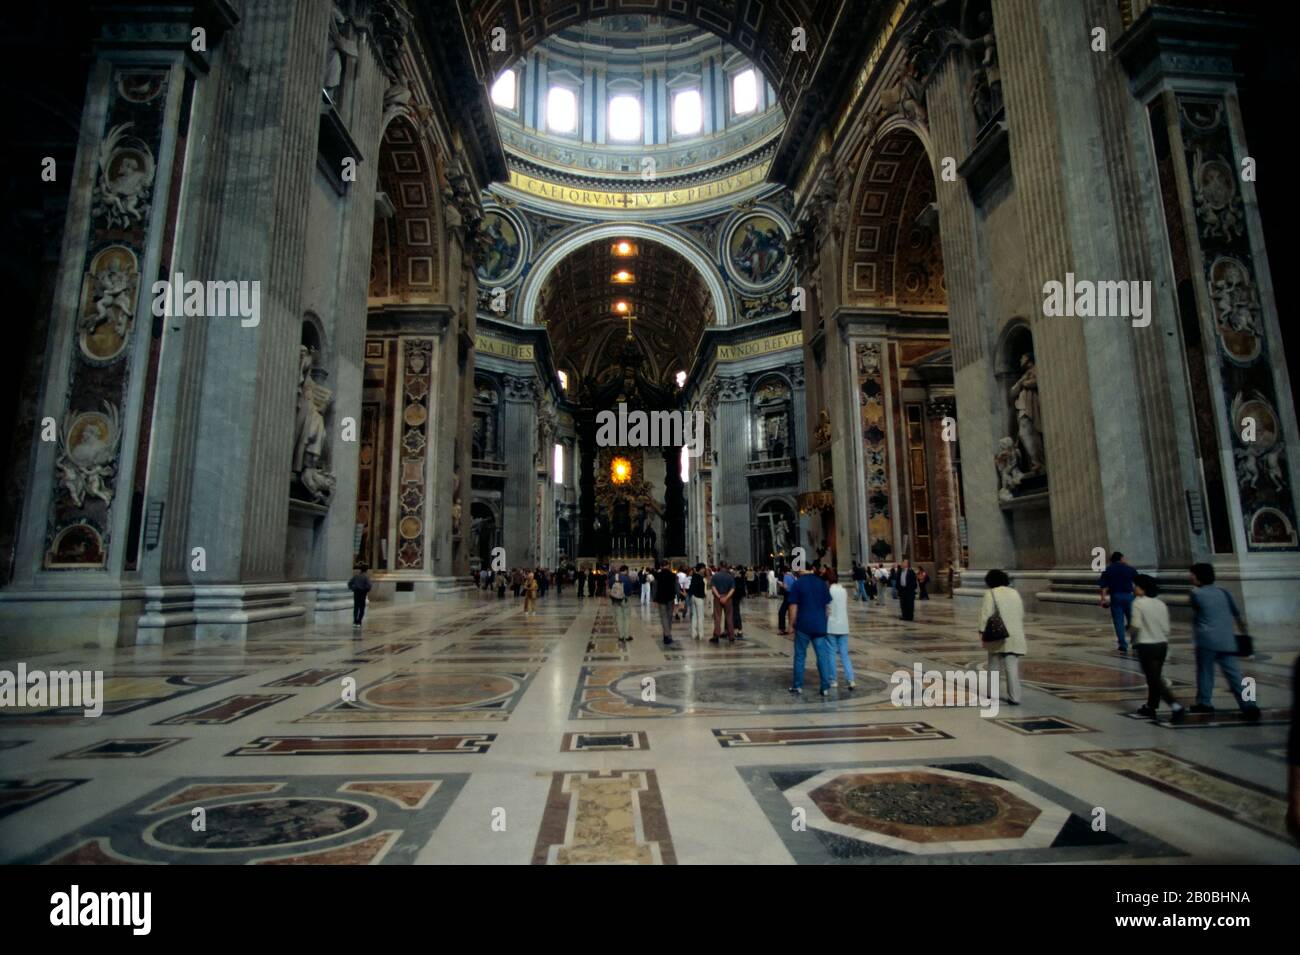 ITALY, ROME, VATICAN, ST. PETER'S SQUARE, ST. PETER'S BASILICA, INTERIOR, NAVE Stock Photo